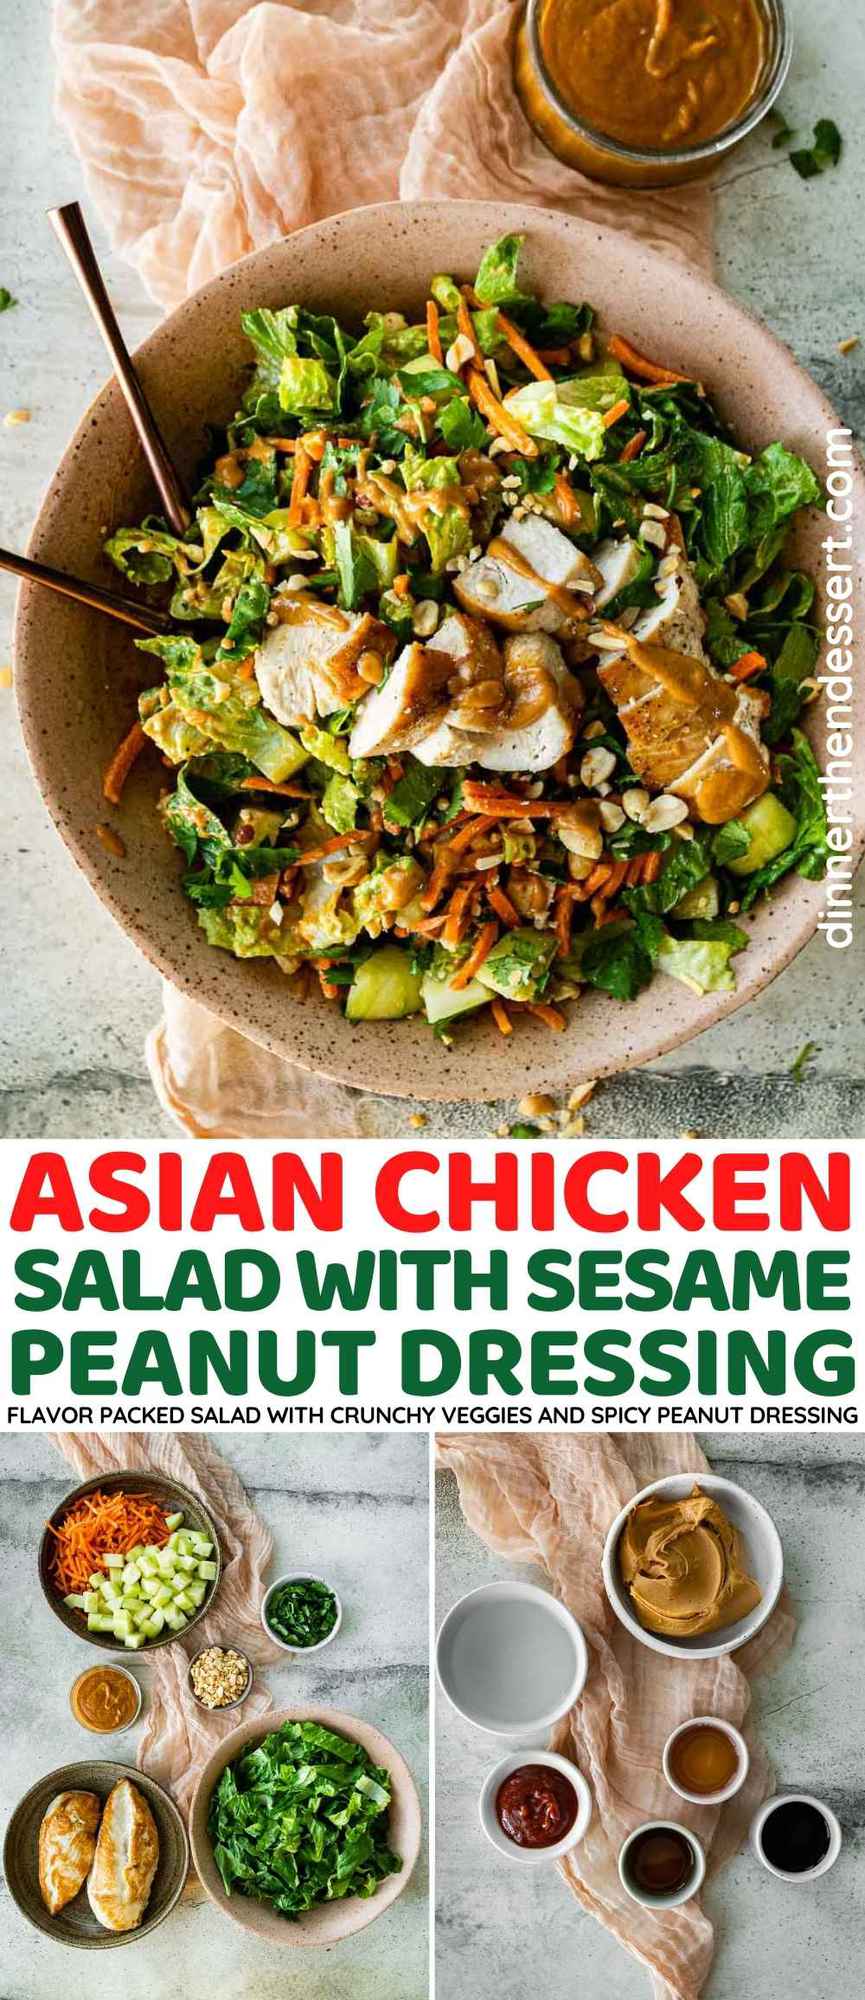 Asian Chicken Salad with Sesame Peanut Dressing collage